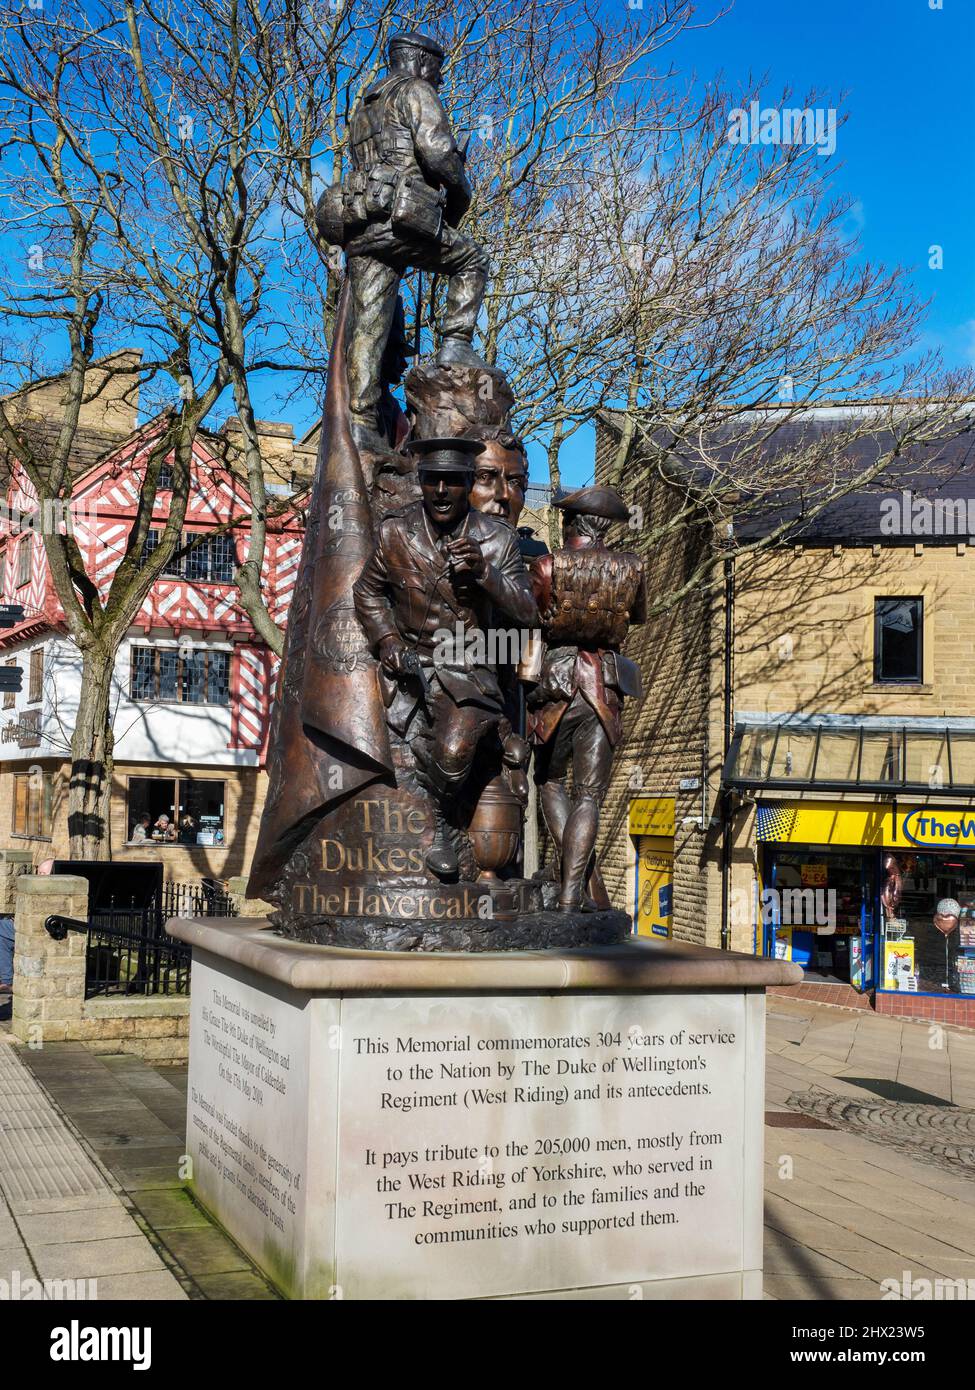 The Duke of Wellingtons Regimental Memorial unveiled in May 2019 at The Woolshops in Halifax Yorkshire England Stock Photo